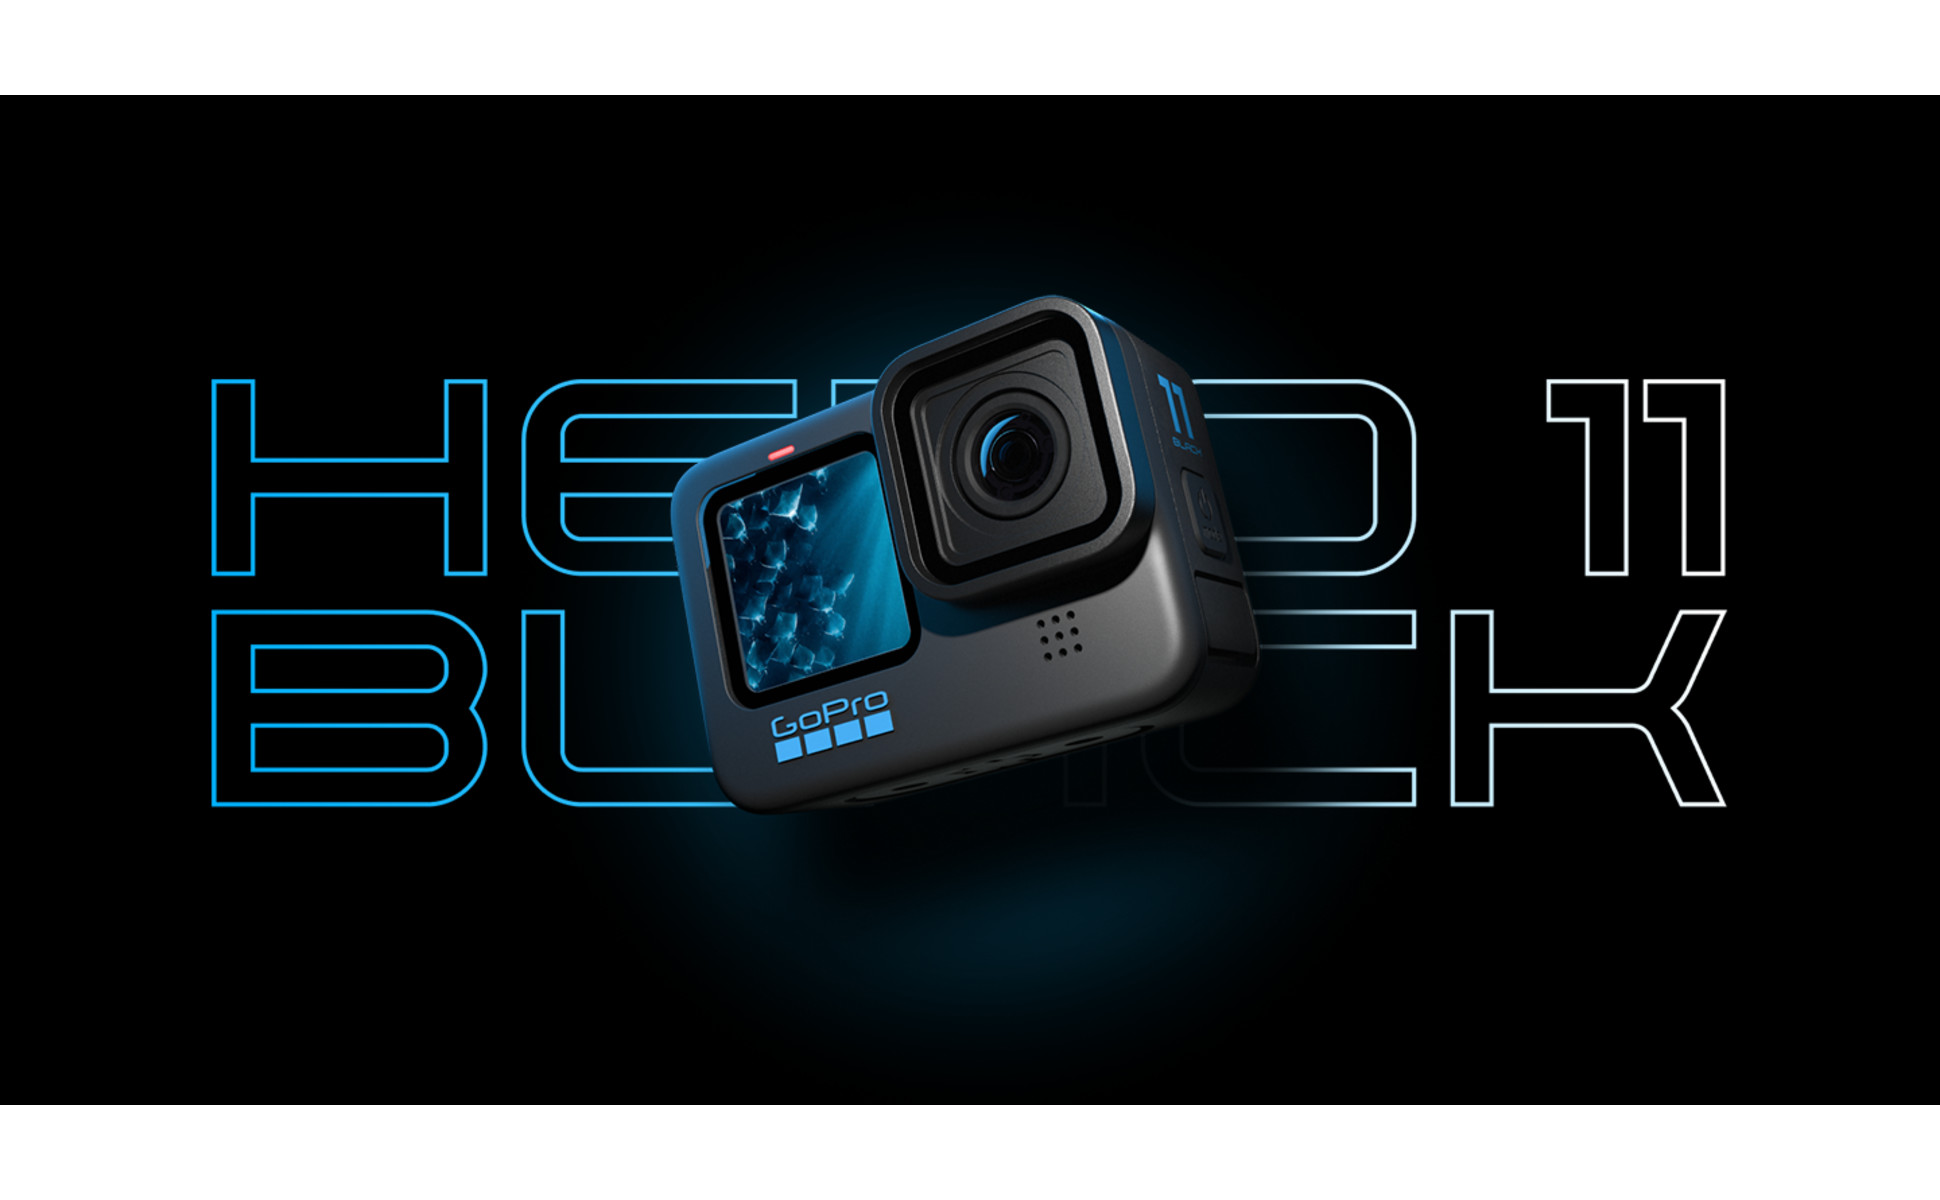  GoPro HERO11 (Hero 11) Black - Waterproof Action Camera with  5.3K Video, 27MP Photos, 1/1.9 Sensor, Live Streaming, Webcam,  Stabilization + 64GB Card, 50 Piece Accessory Kit and 2 Extra Batteries :  Electronics